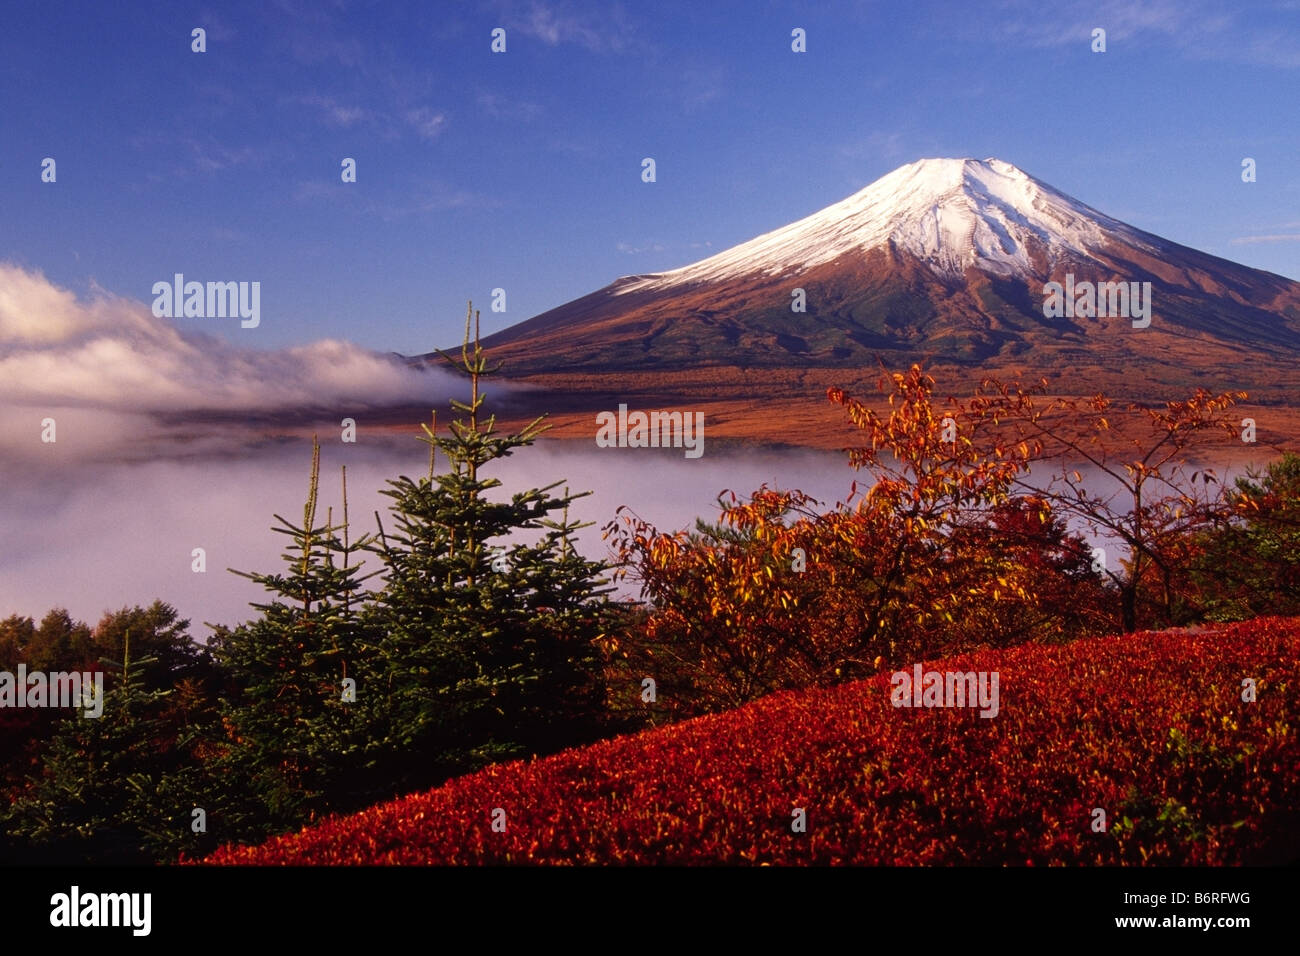 Mount Fuji in autumn with mist rising from lake, Japan Stock Photo